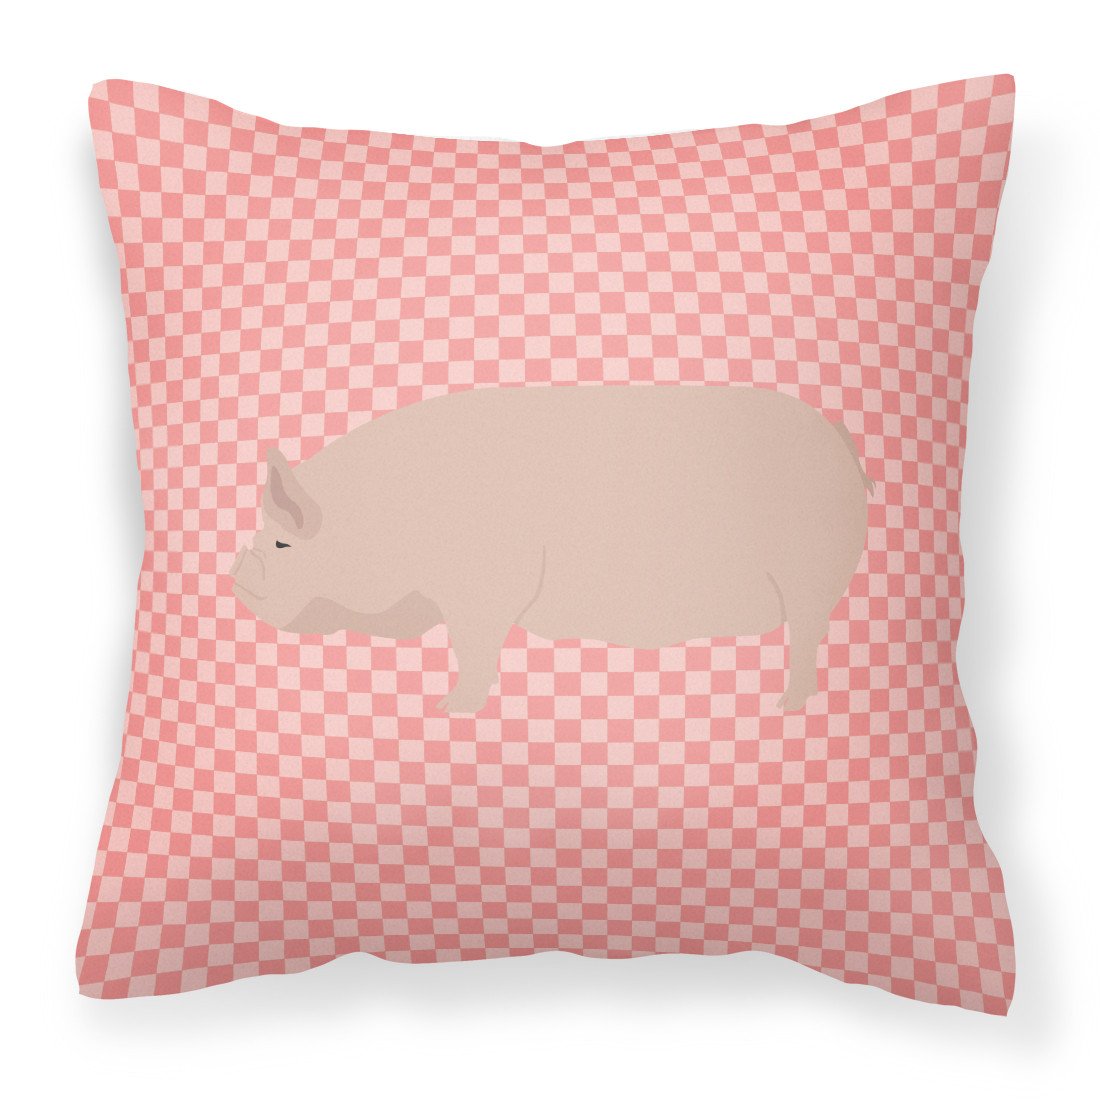 Welsh Pig Pink Check Fabric Decorative Pillow BB7937PW1818 by Caroline's Treasures